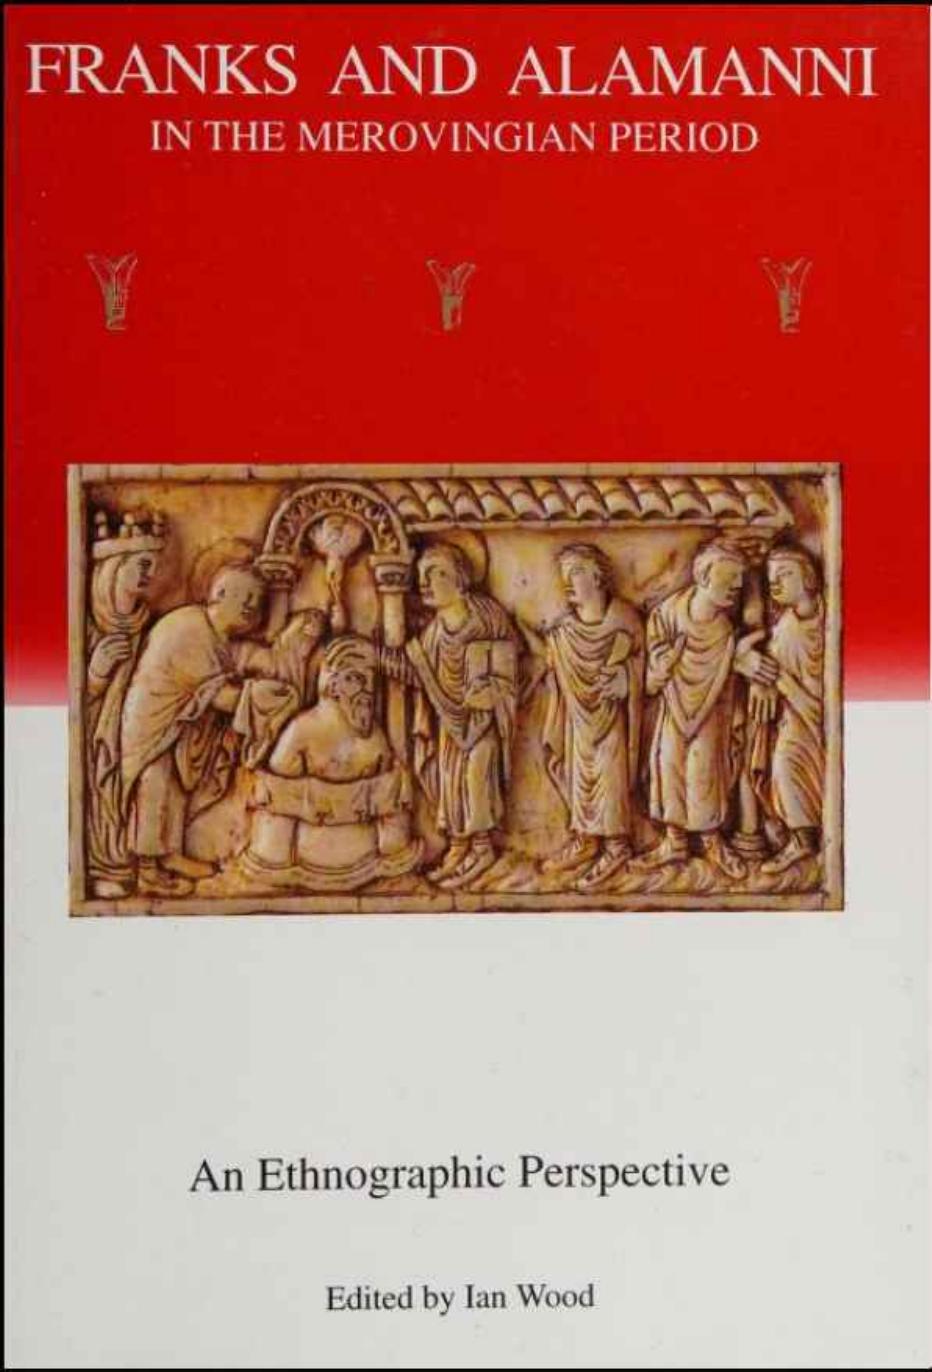 Franks and Alamanni in the Merovingian Period: An Ethnographic Perspective